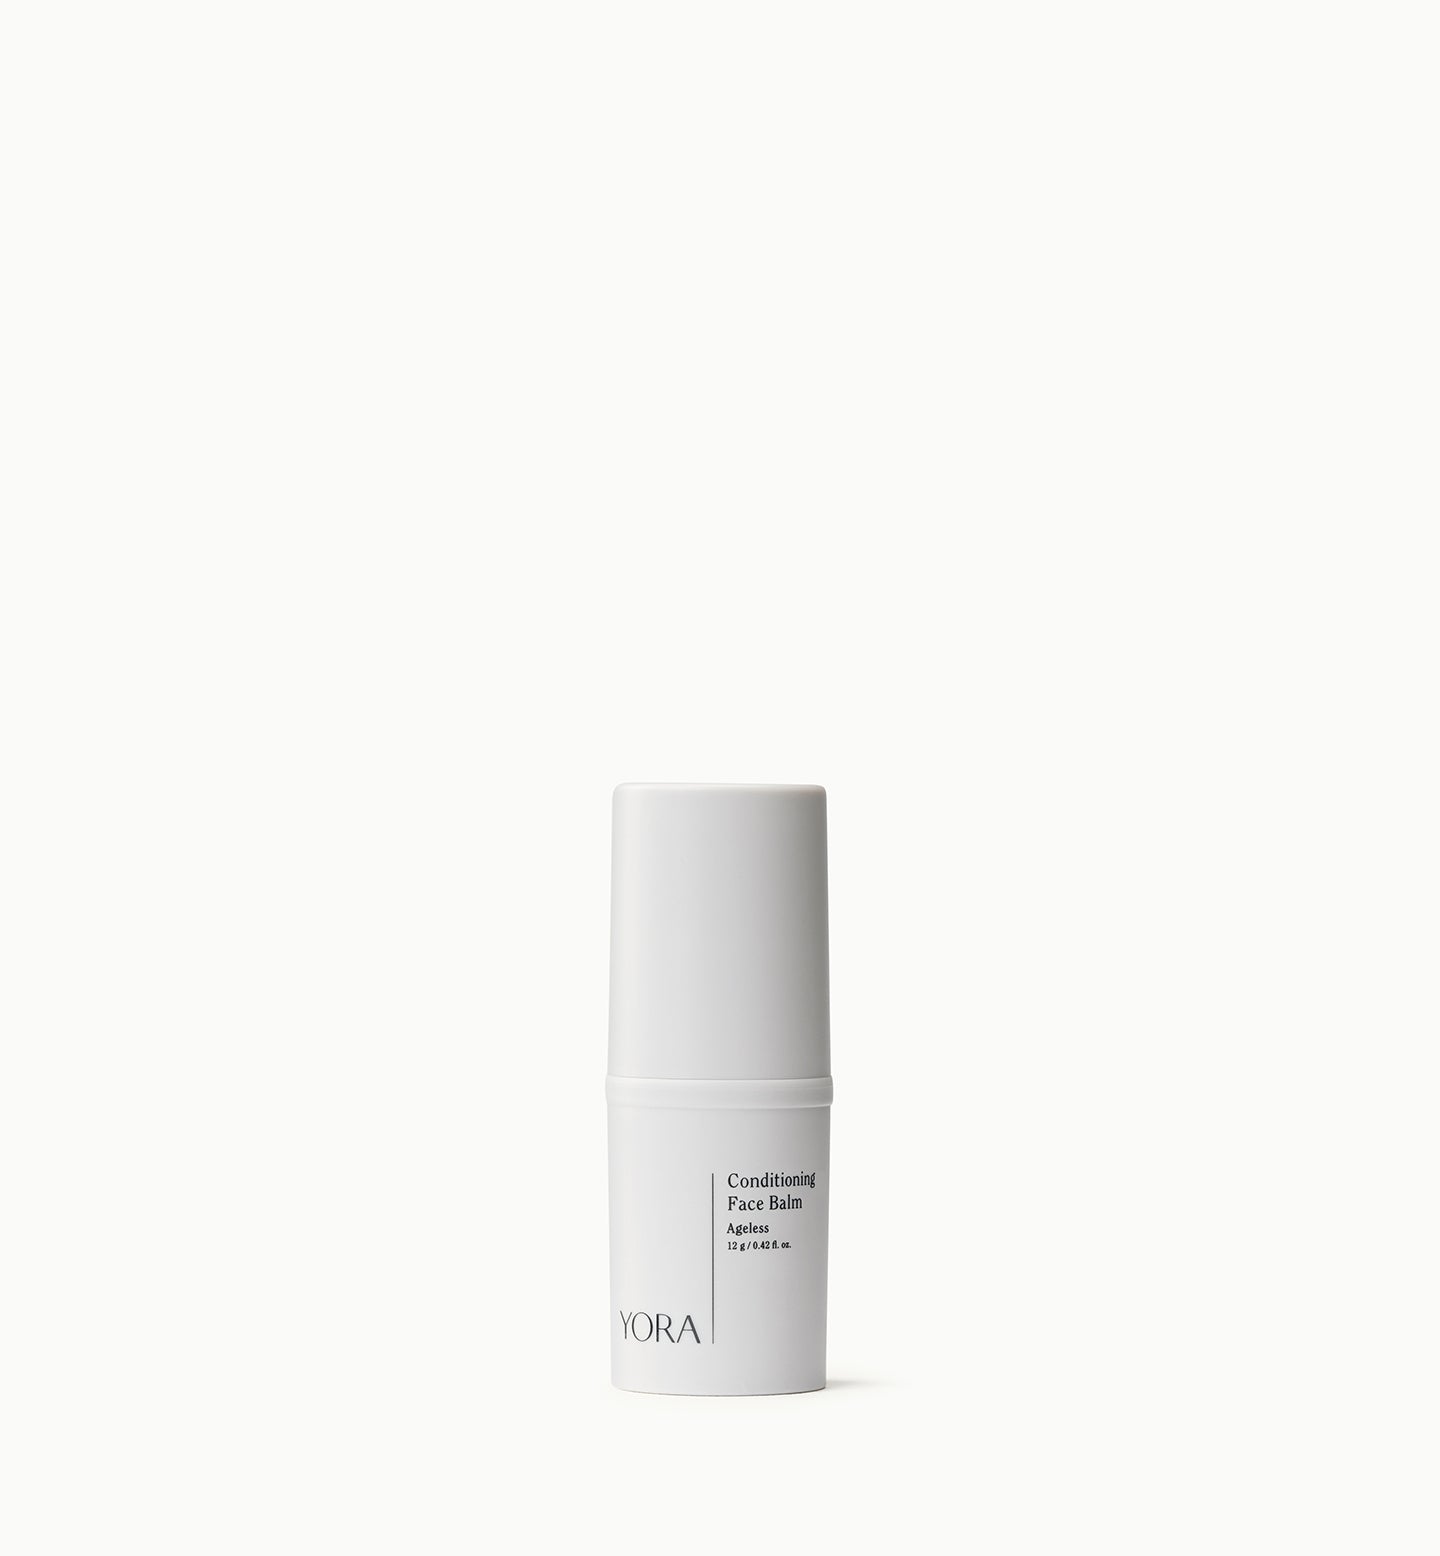 Conditioning Face Balm